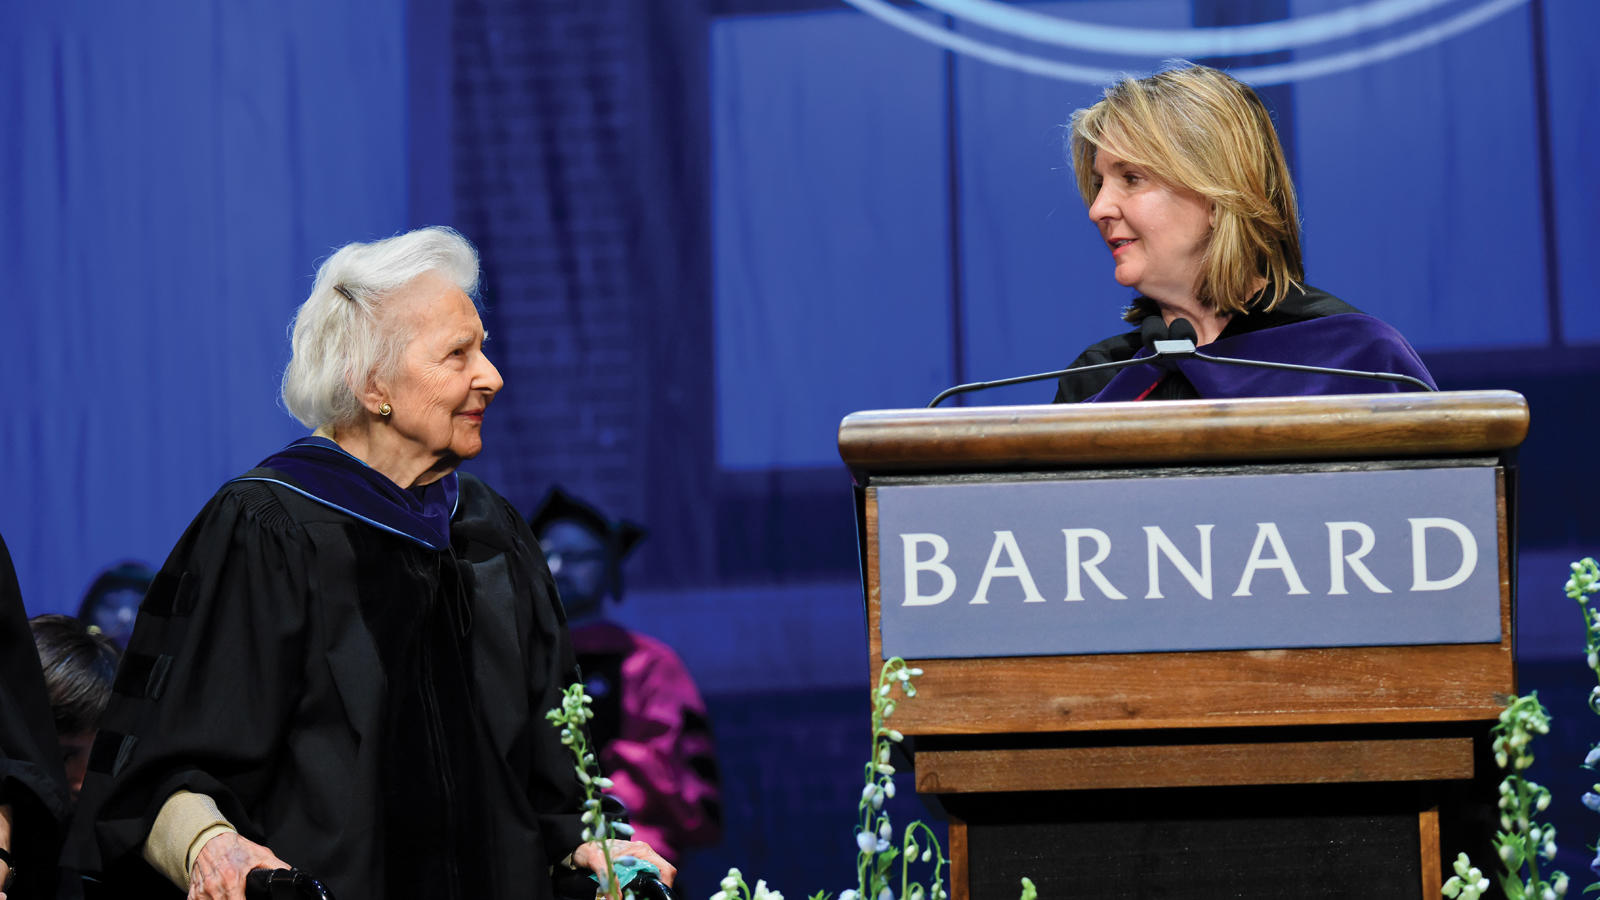 2 alumnae on stage in black academic gowns